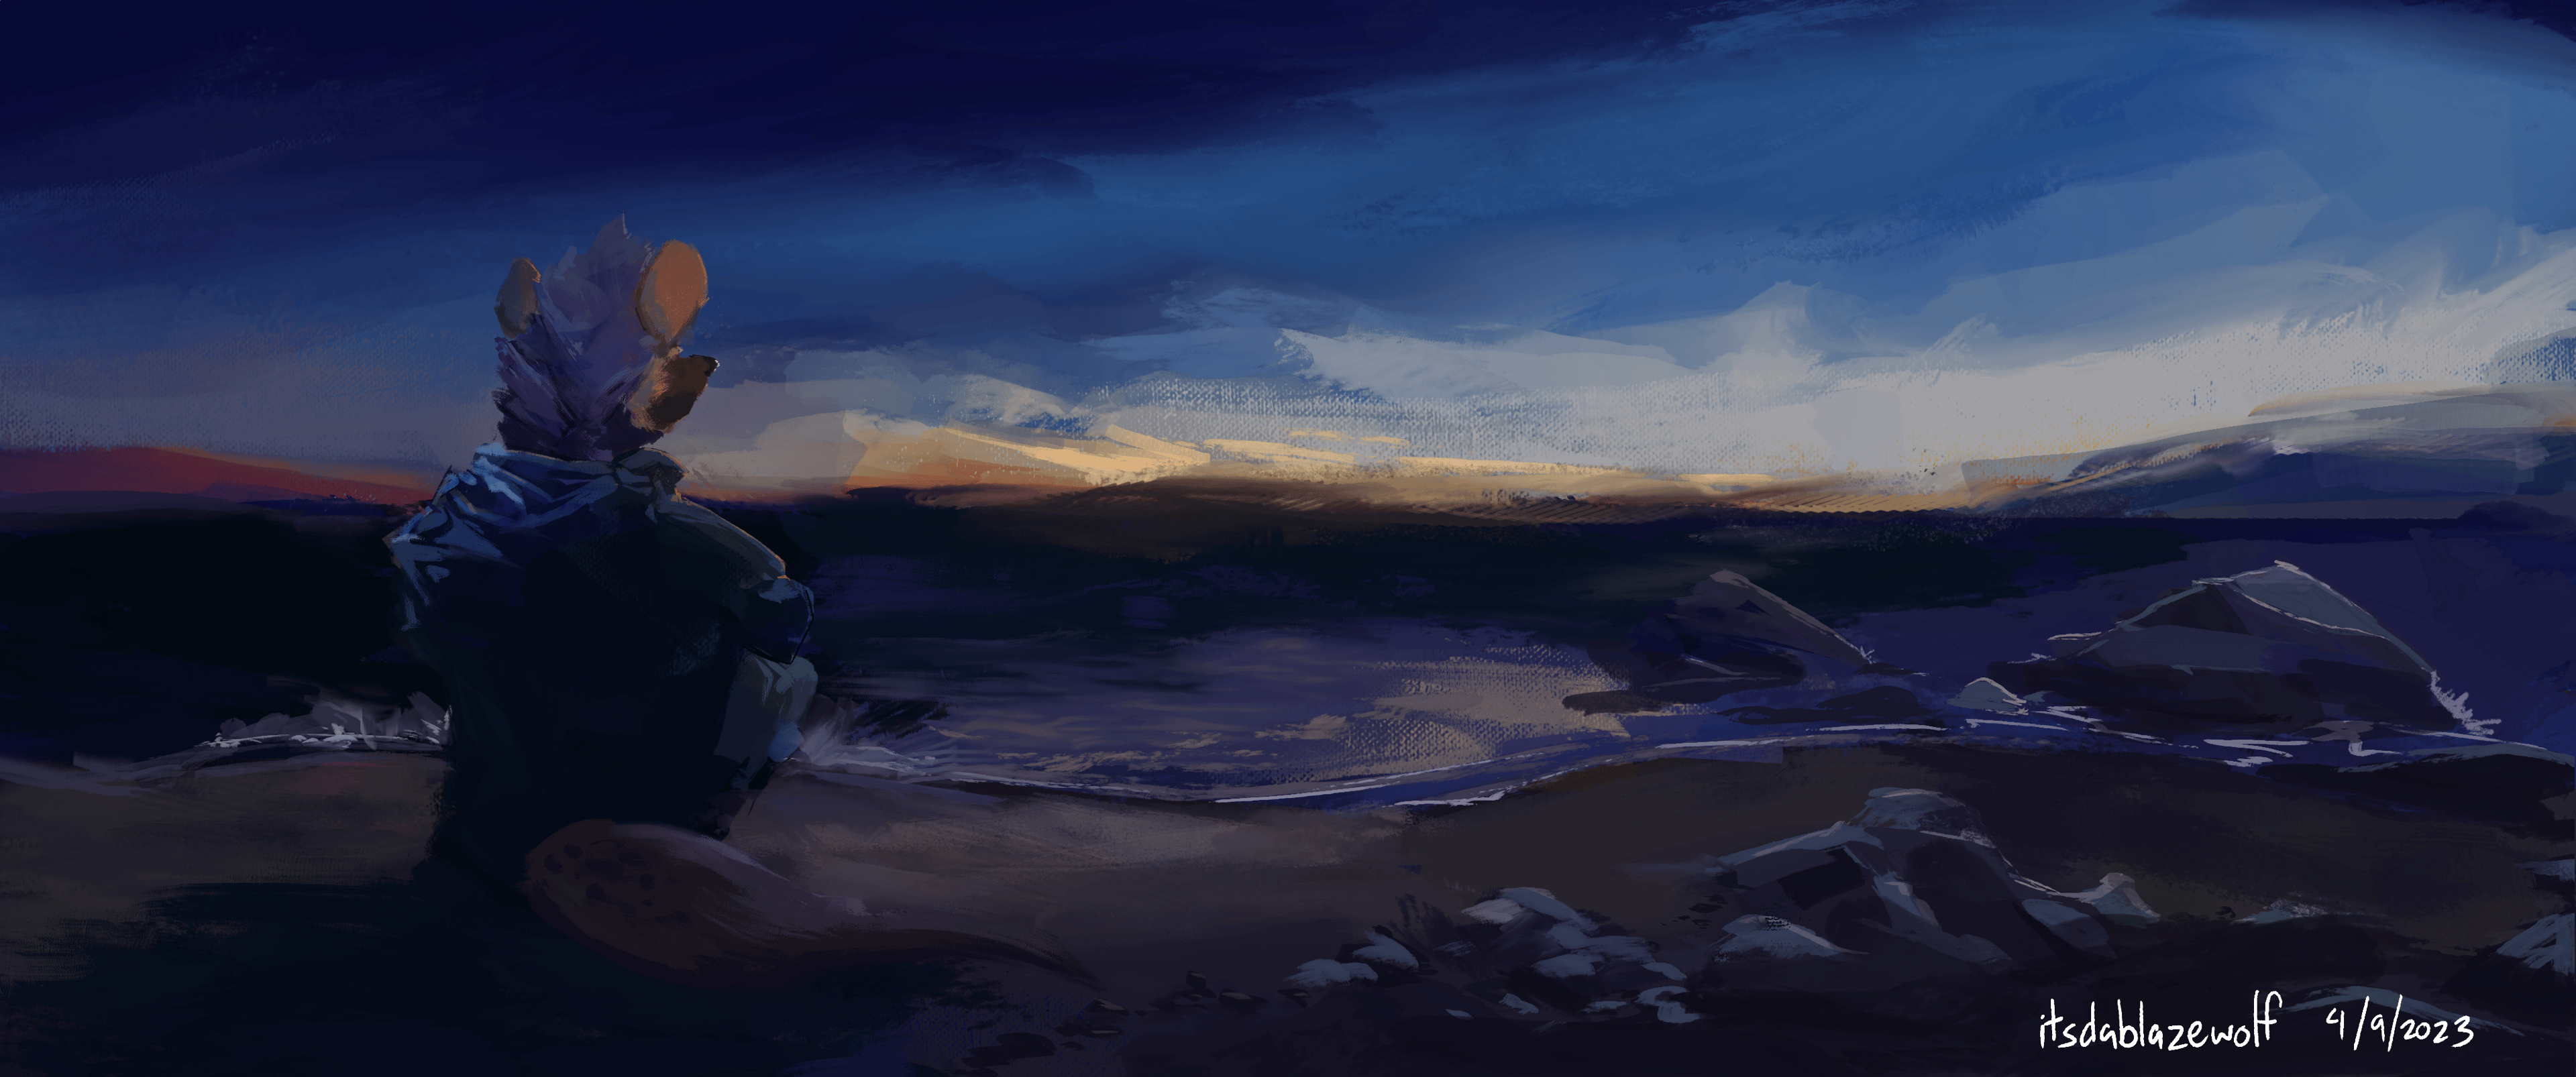 A digital painting of Ibzan, and anthropomorphic spotted hyena with blue hair, sat on a beach just after sundown. He is faced away from the viewer, watching the waves and mixture of colours in the sky go by. In there forground there are a couple of rocks on the sand and where waves are lapping at, and on the horizon there is a mix of colours from reds and yellows to pale and deep blues. Art by Blaze Silverwolf.